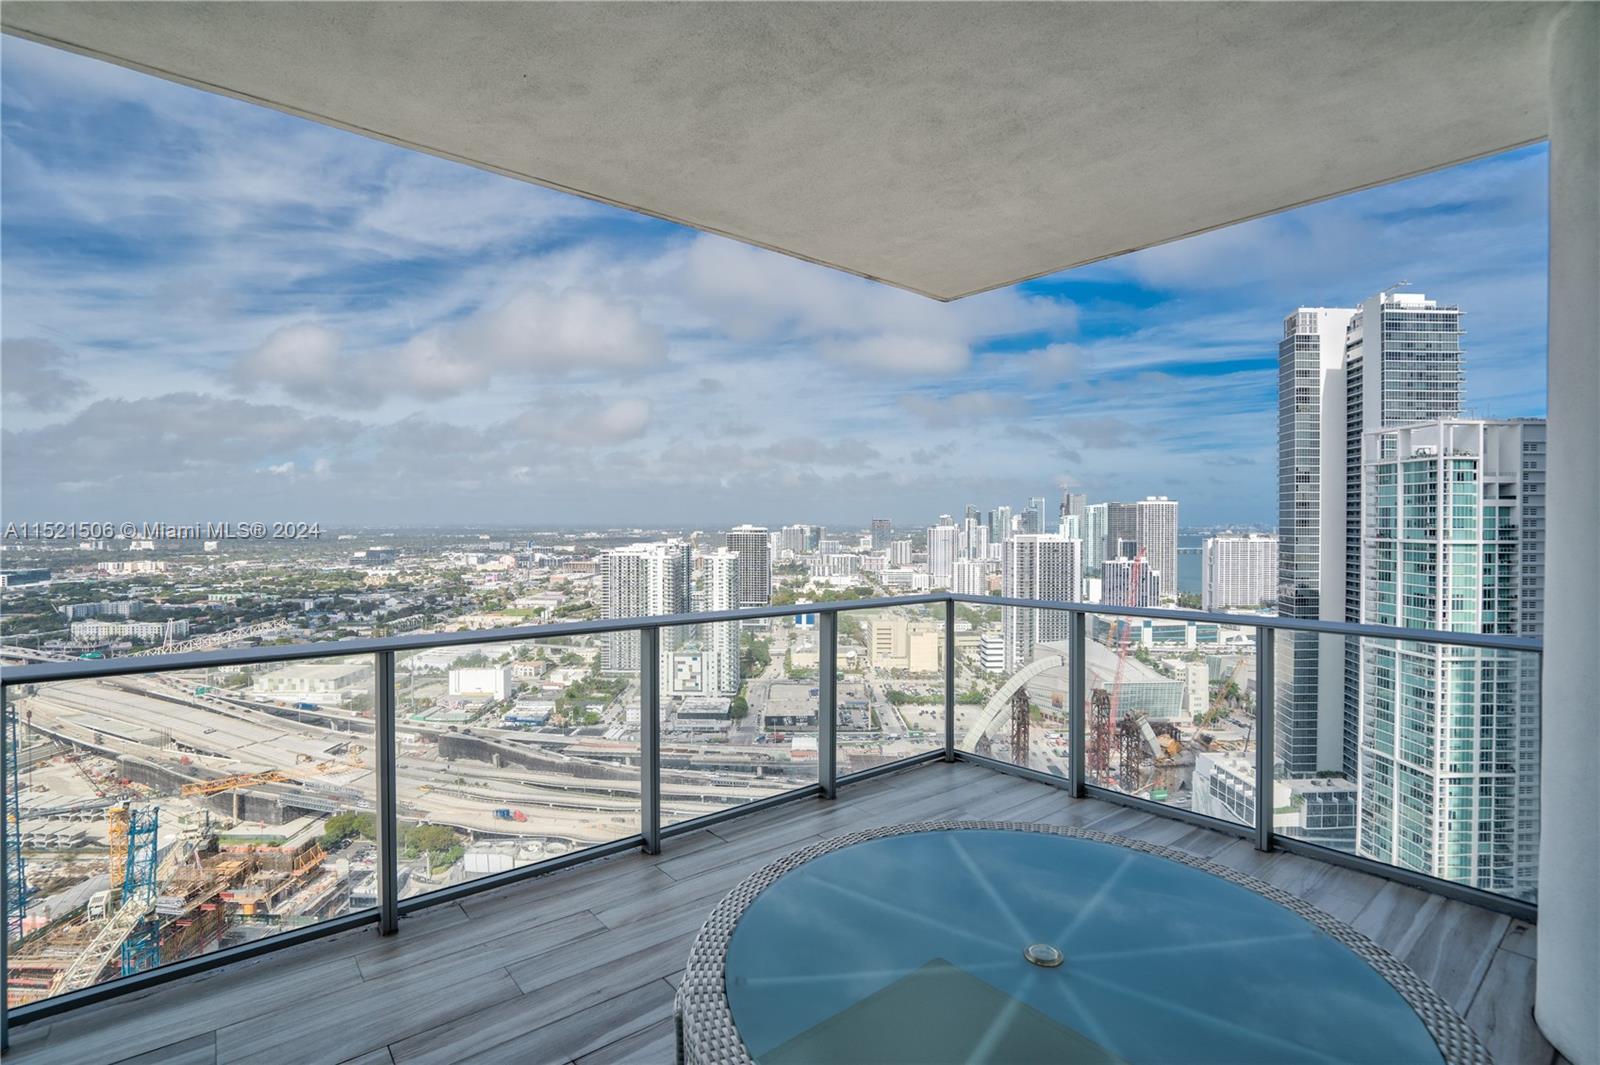 PARAMOUNT Miami Worldcenter, the building with the most amenities in the world including 5 pools, st